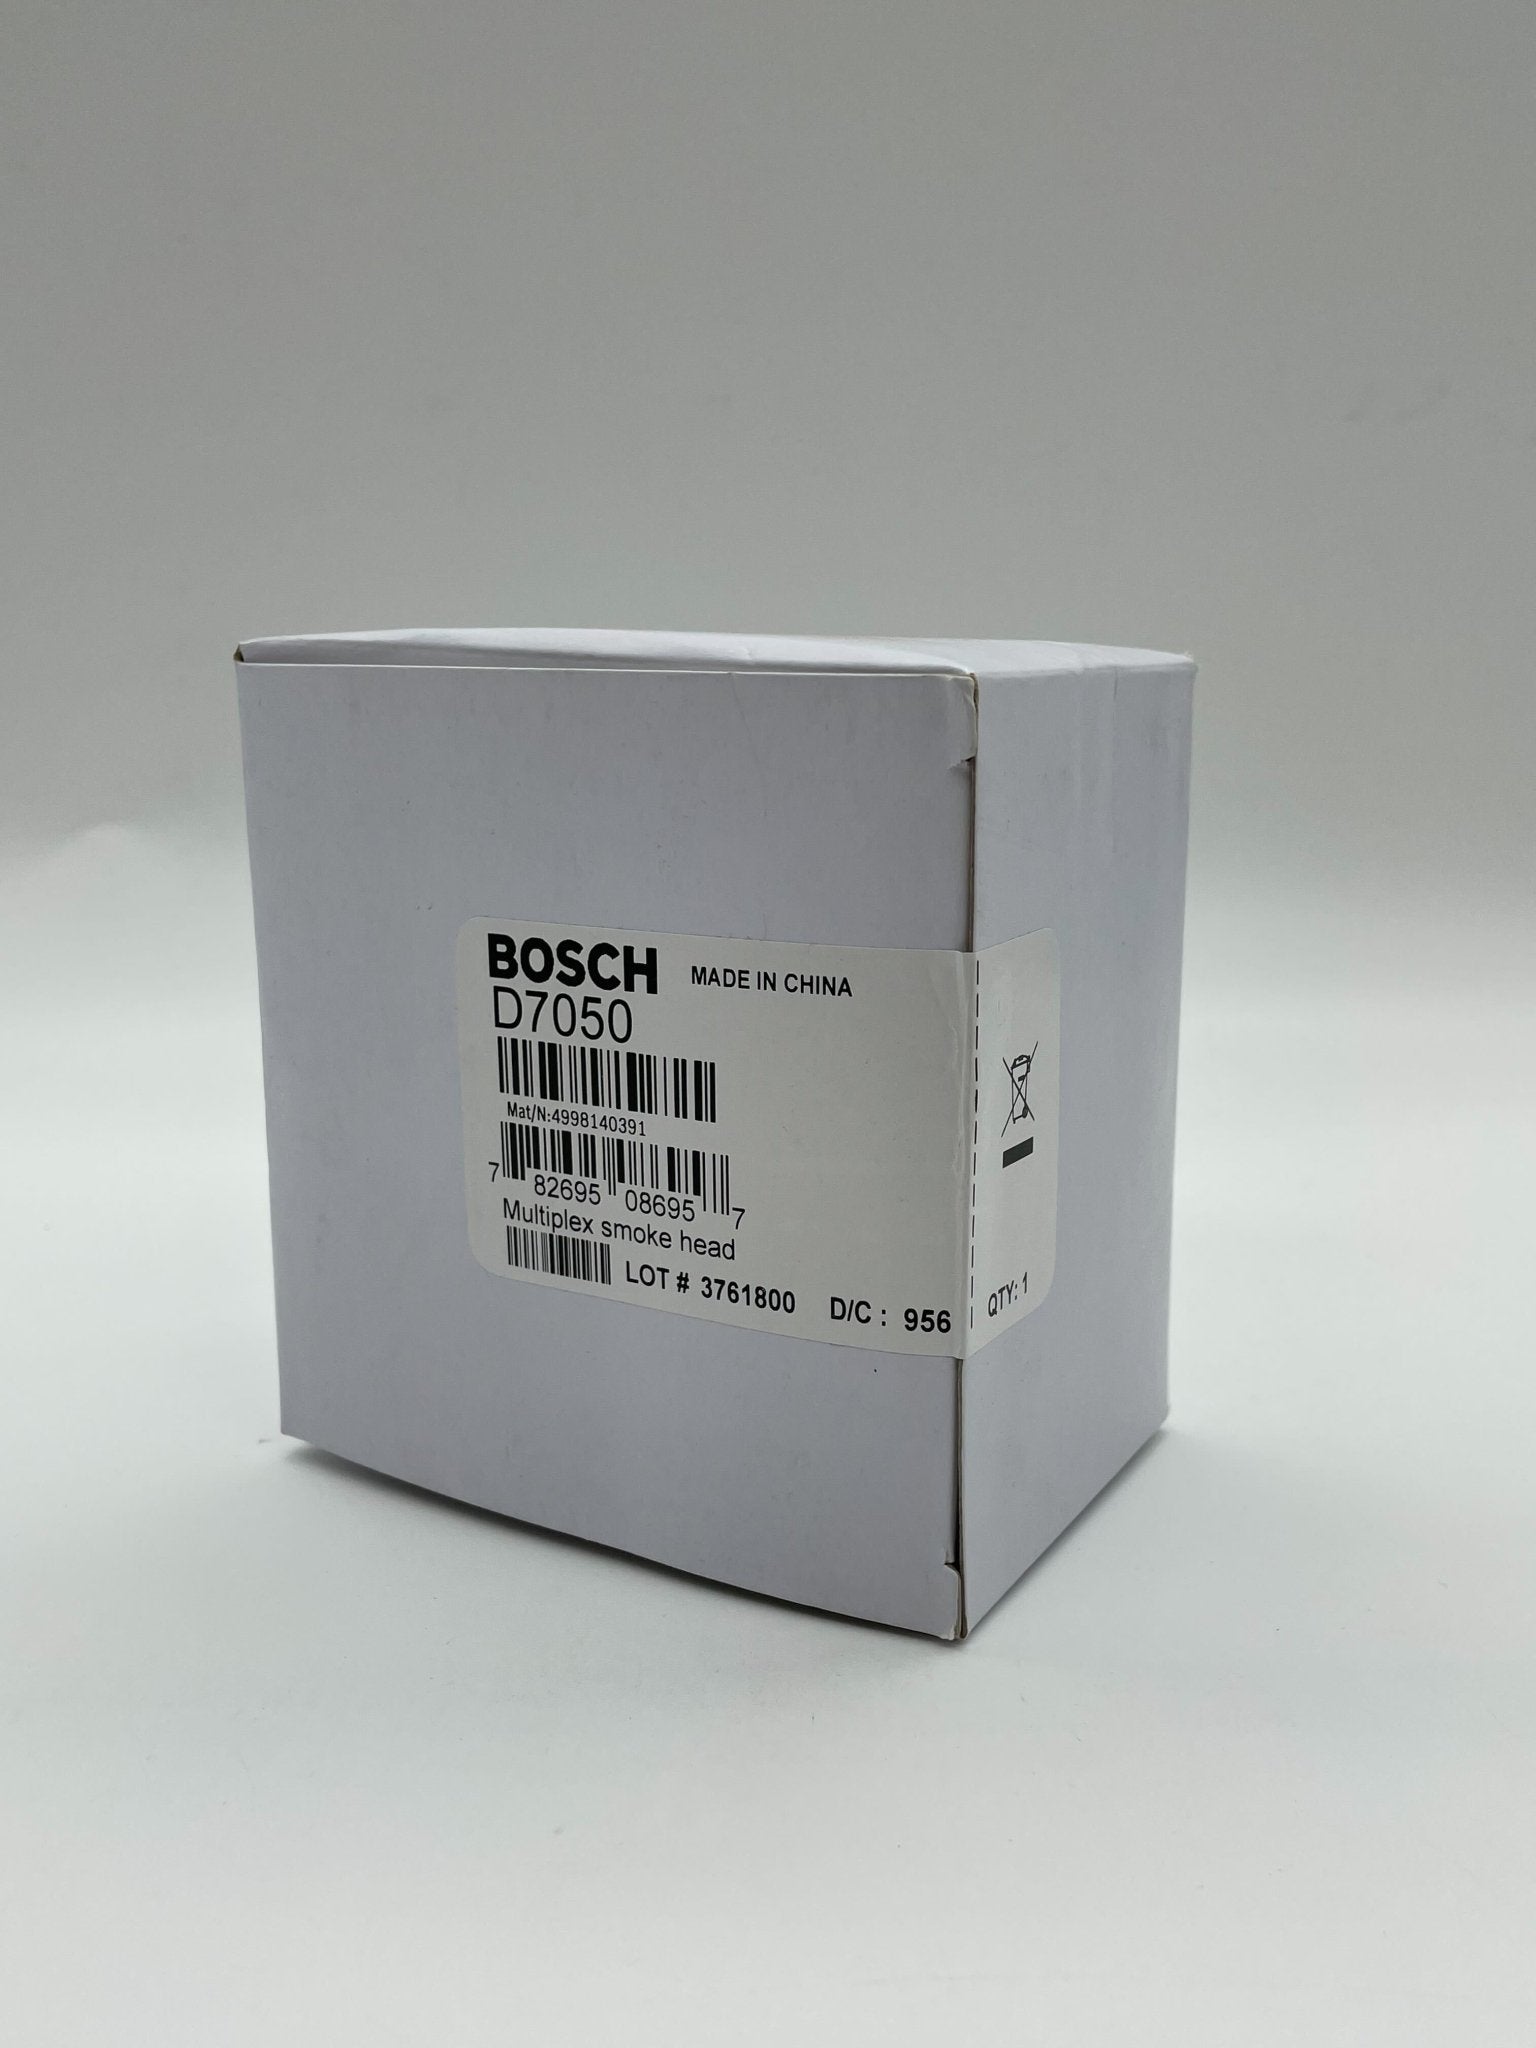 Bosch D7050 (Discontinued, Last Units in Stock)